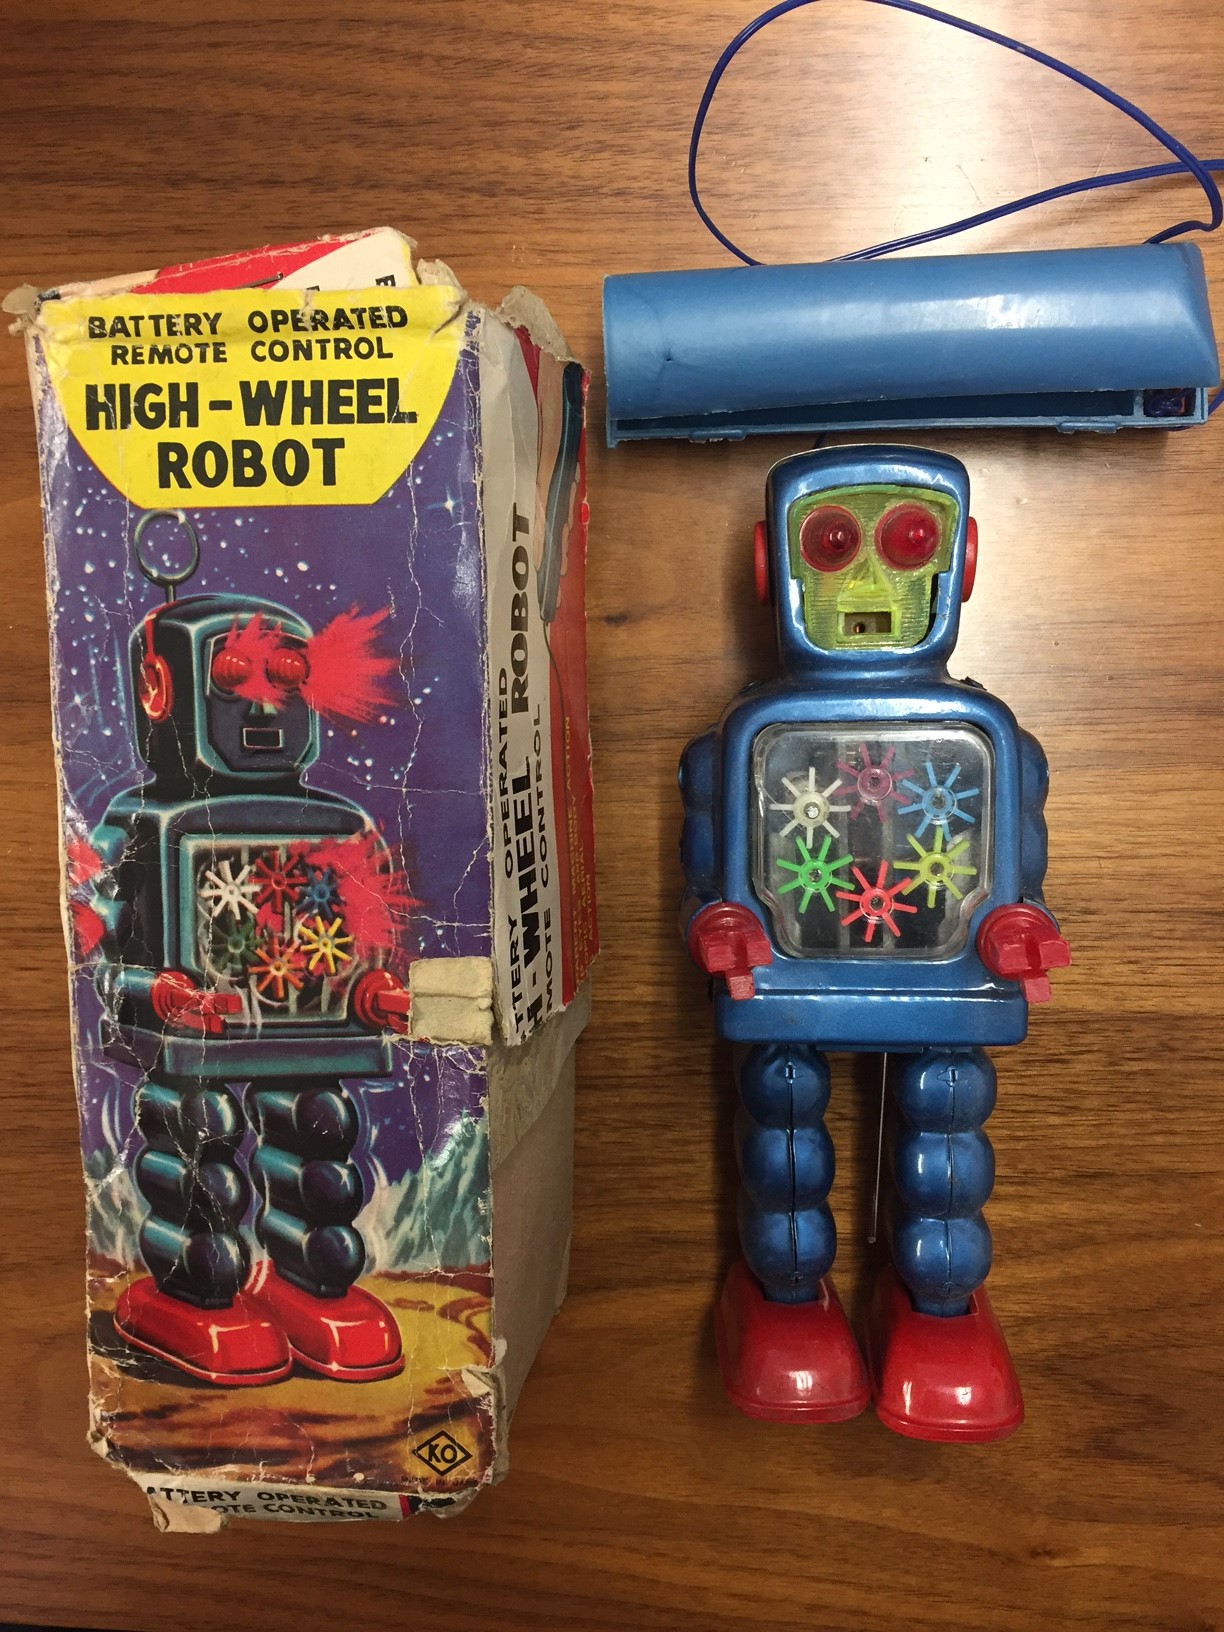 A boxed 1960s battery-operated robot